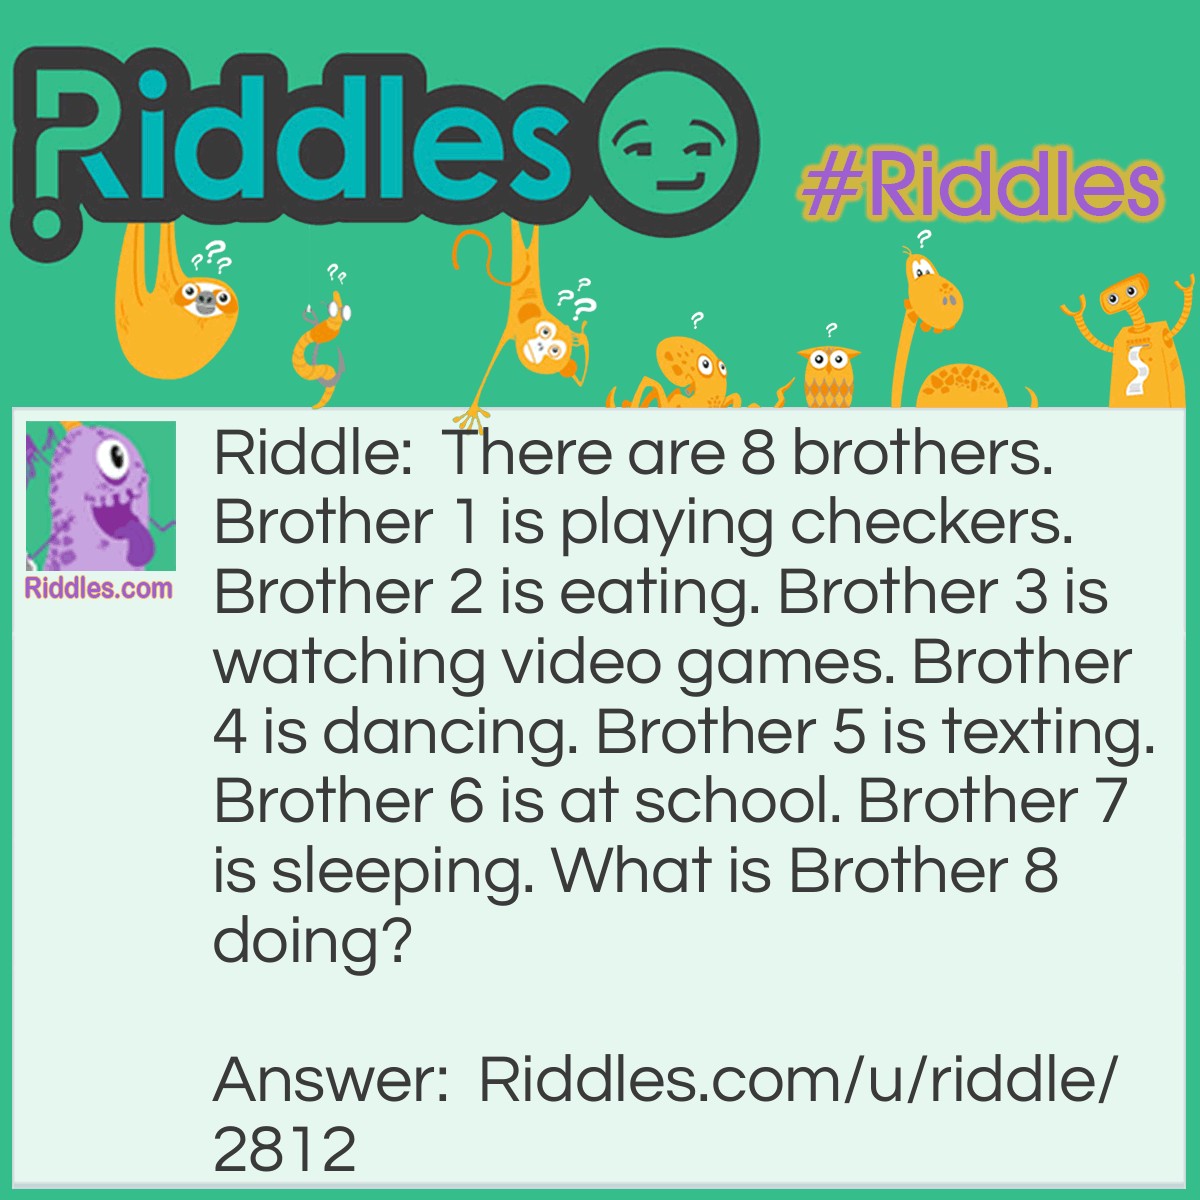 Riddle: There are 8 brothers. Brother 1 is playing checkers. Brother 2 is eating. Brother 3 is watching video games. Brother 4 is dancing. Brother 5 is texting. Brother 6 is at school. Brother 7 is sleeping. What is Brother 8 doing? Answer: Brother 8 is playing checkers with Brother 1 because checkers includes two people to play.